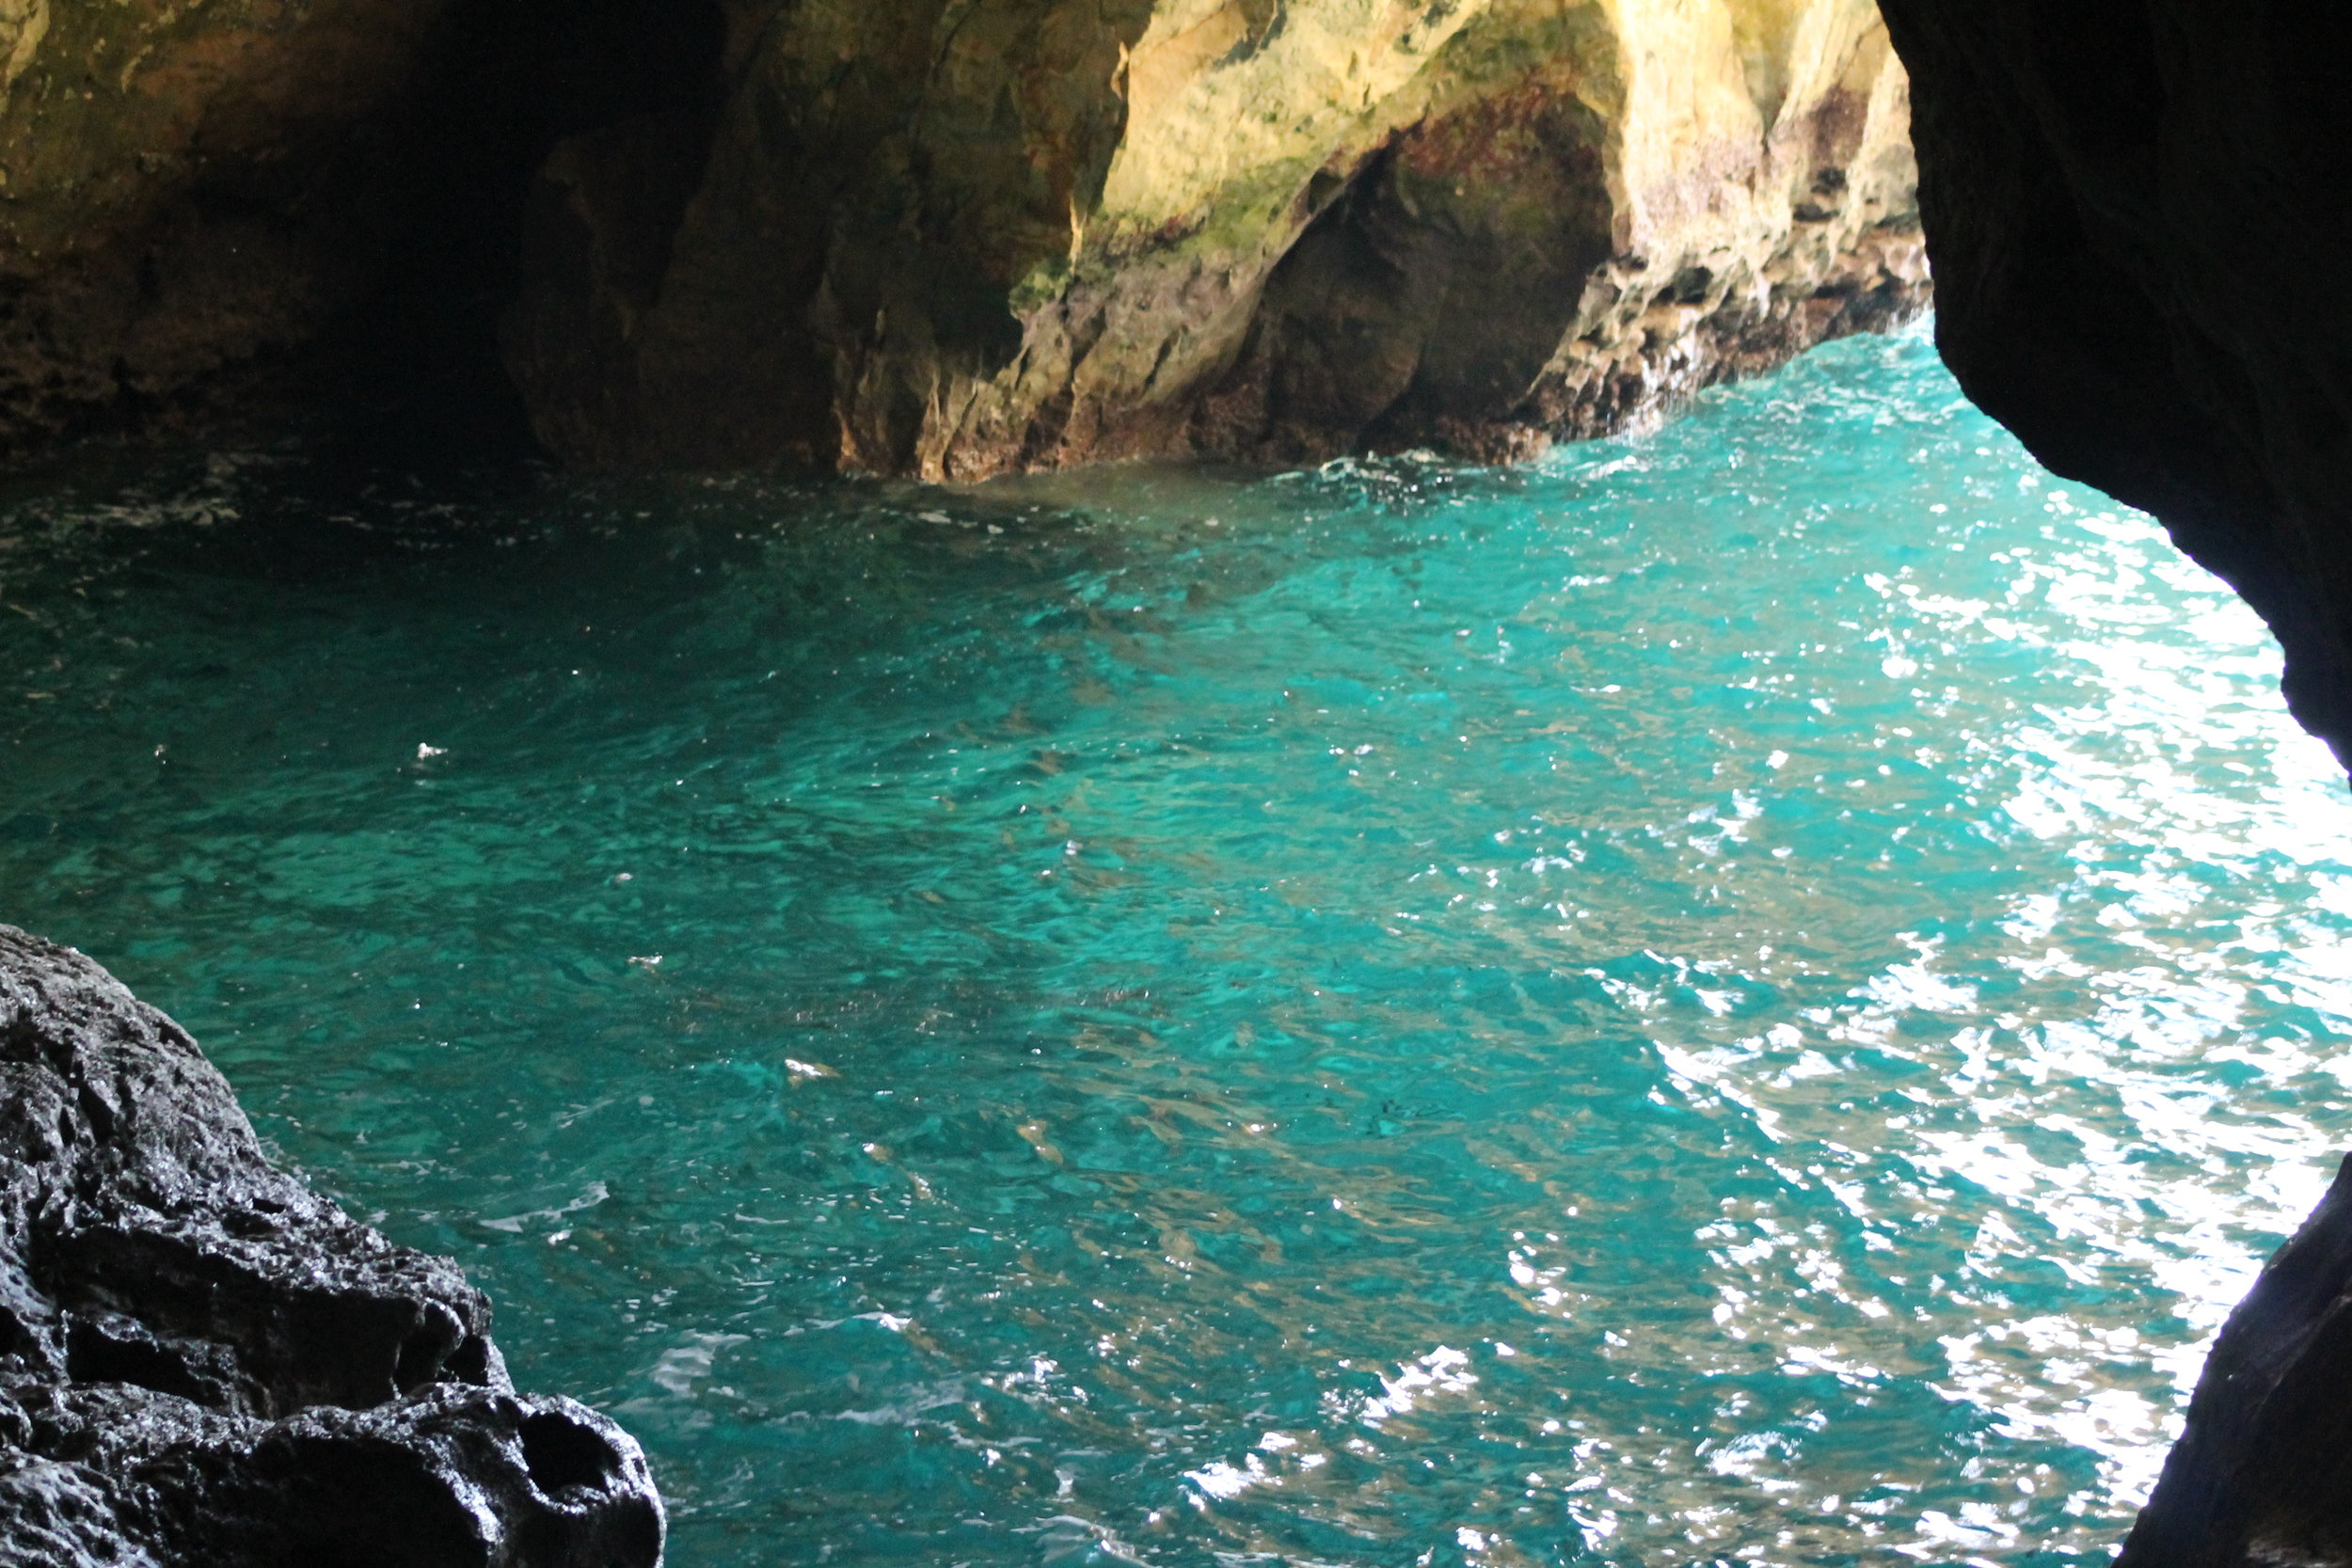 Beautiful grotto formed by the action of the Mediterranean Sea near Lebanon.